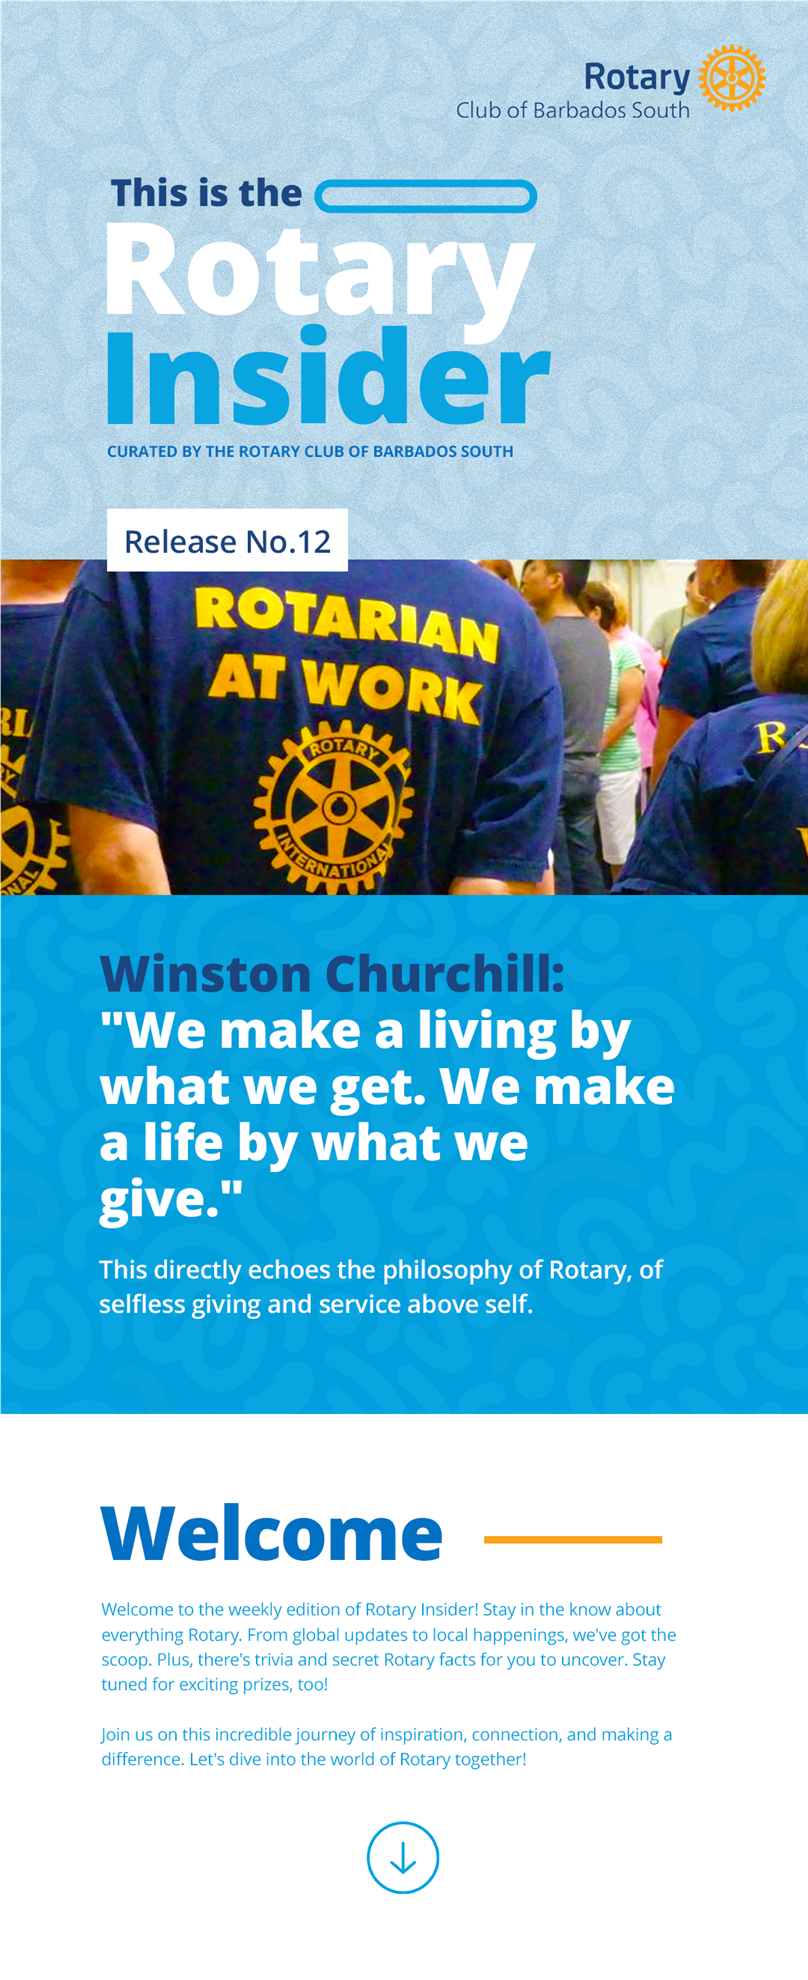 This is the Rotary Insider curated by the Rotary Club of Barbados South Release No.12  Winston Churchill: "We make a living by what we get. We make a life by what we give." This directly echoes the philosophy of Rotary, of selfless giving and service above self.  Welcome to the weekly edition of Rotary Insider! Stay in the know about everything Rotary. From global updates to local happenings, we've got the scoop. Plus, there's trivia and secret Rotary facts for you to uncover. Stay tuned for exciting prizes, too!   Join us on this incredible journey of inspiration, connection, and making a difference. Let's dive into the world of Rotary together!